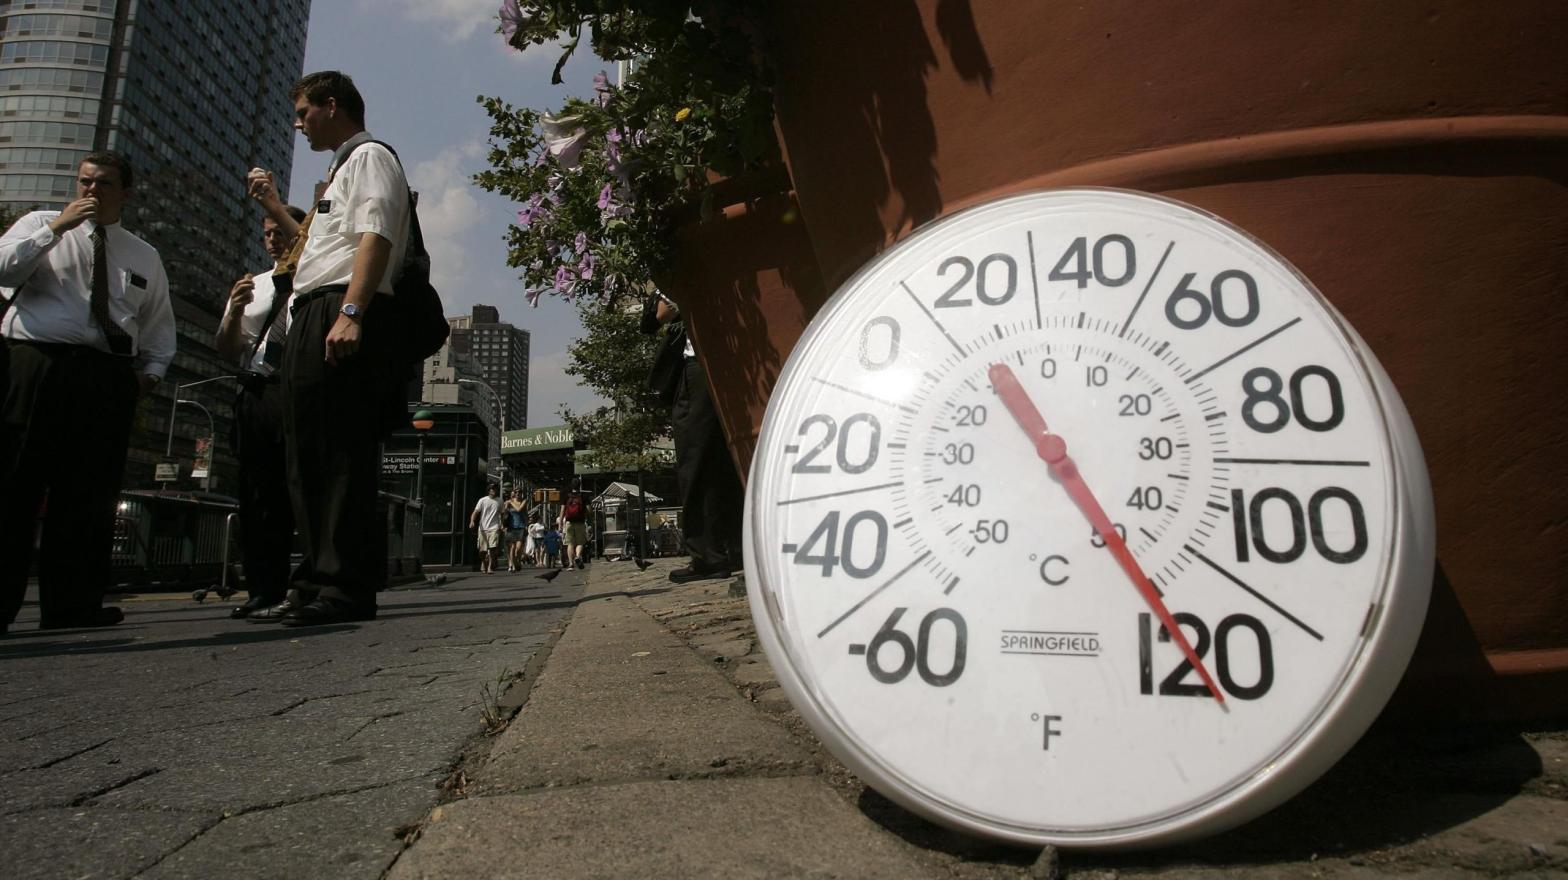 A thermometer in the sun on the footpath indicates a temperature of 120 degrees Fahrenheit as people eat ice cream on the Upper West Side August 2, 2006  (Photo: Chris Hondros, Getty Images)